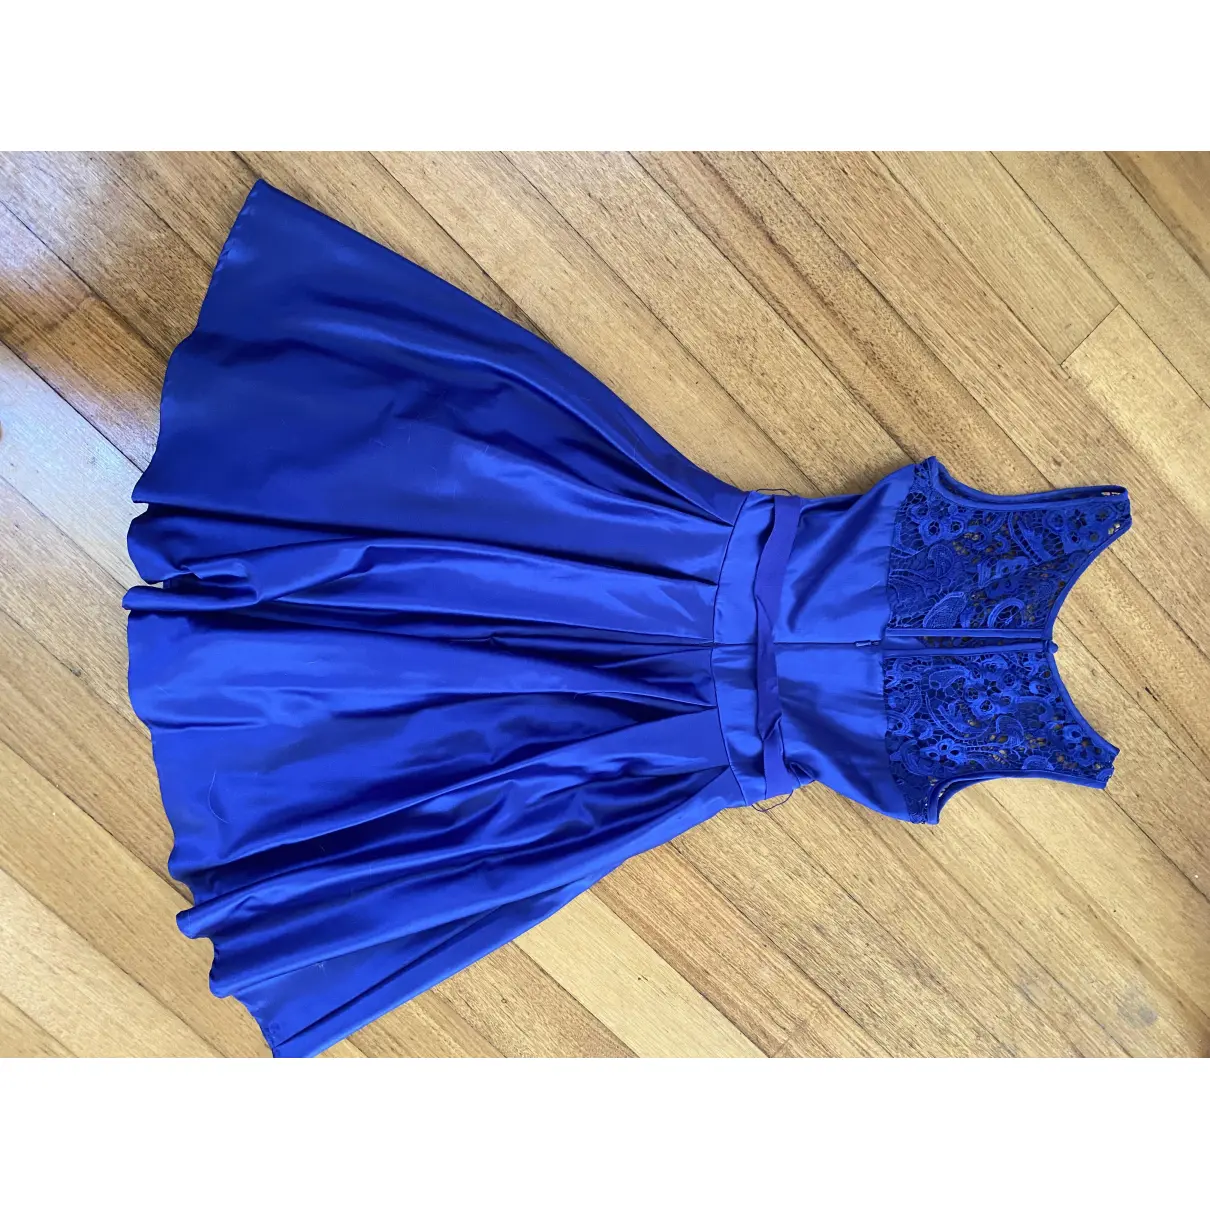 Buy Review Mid-length dress online